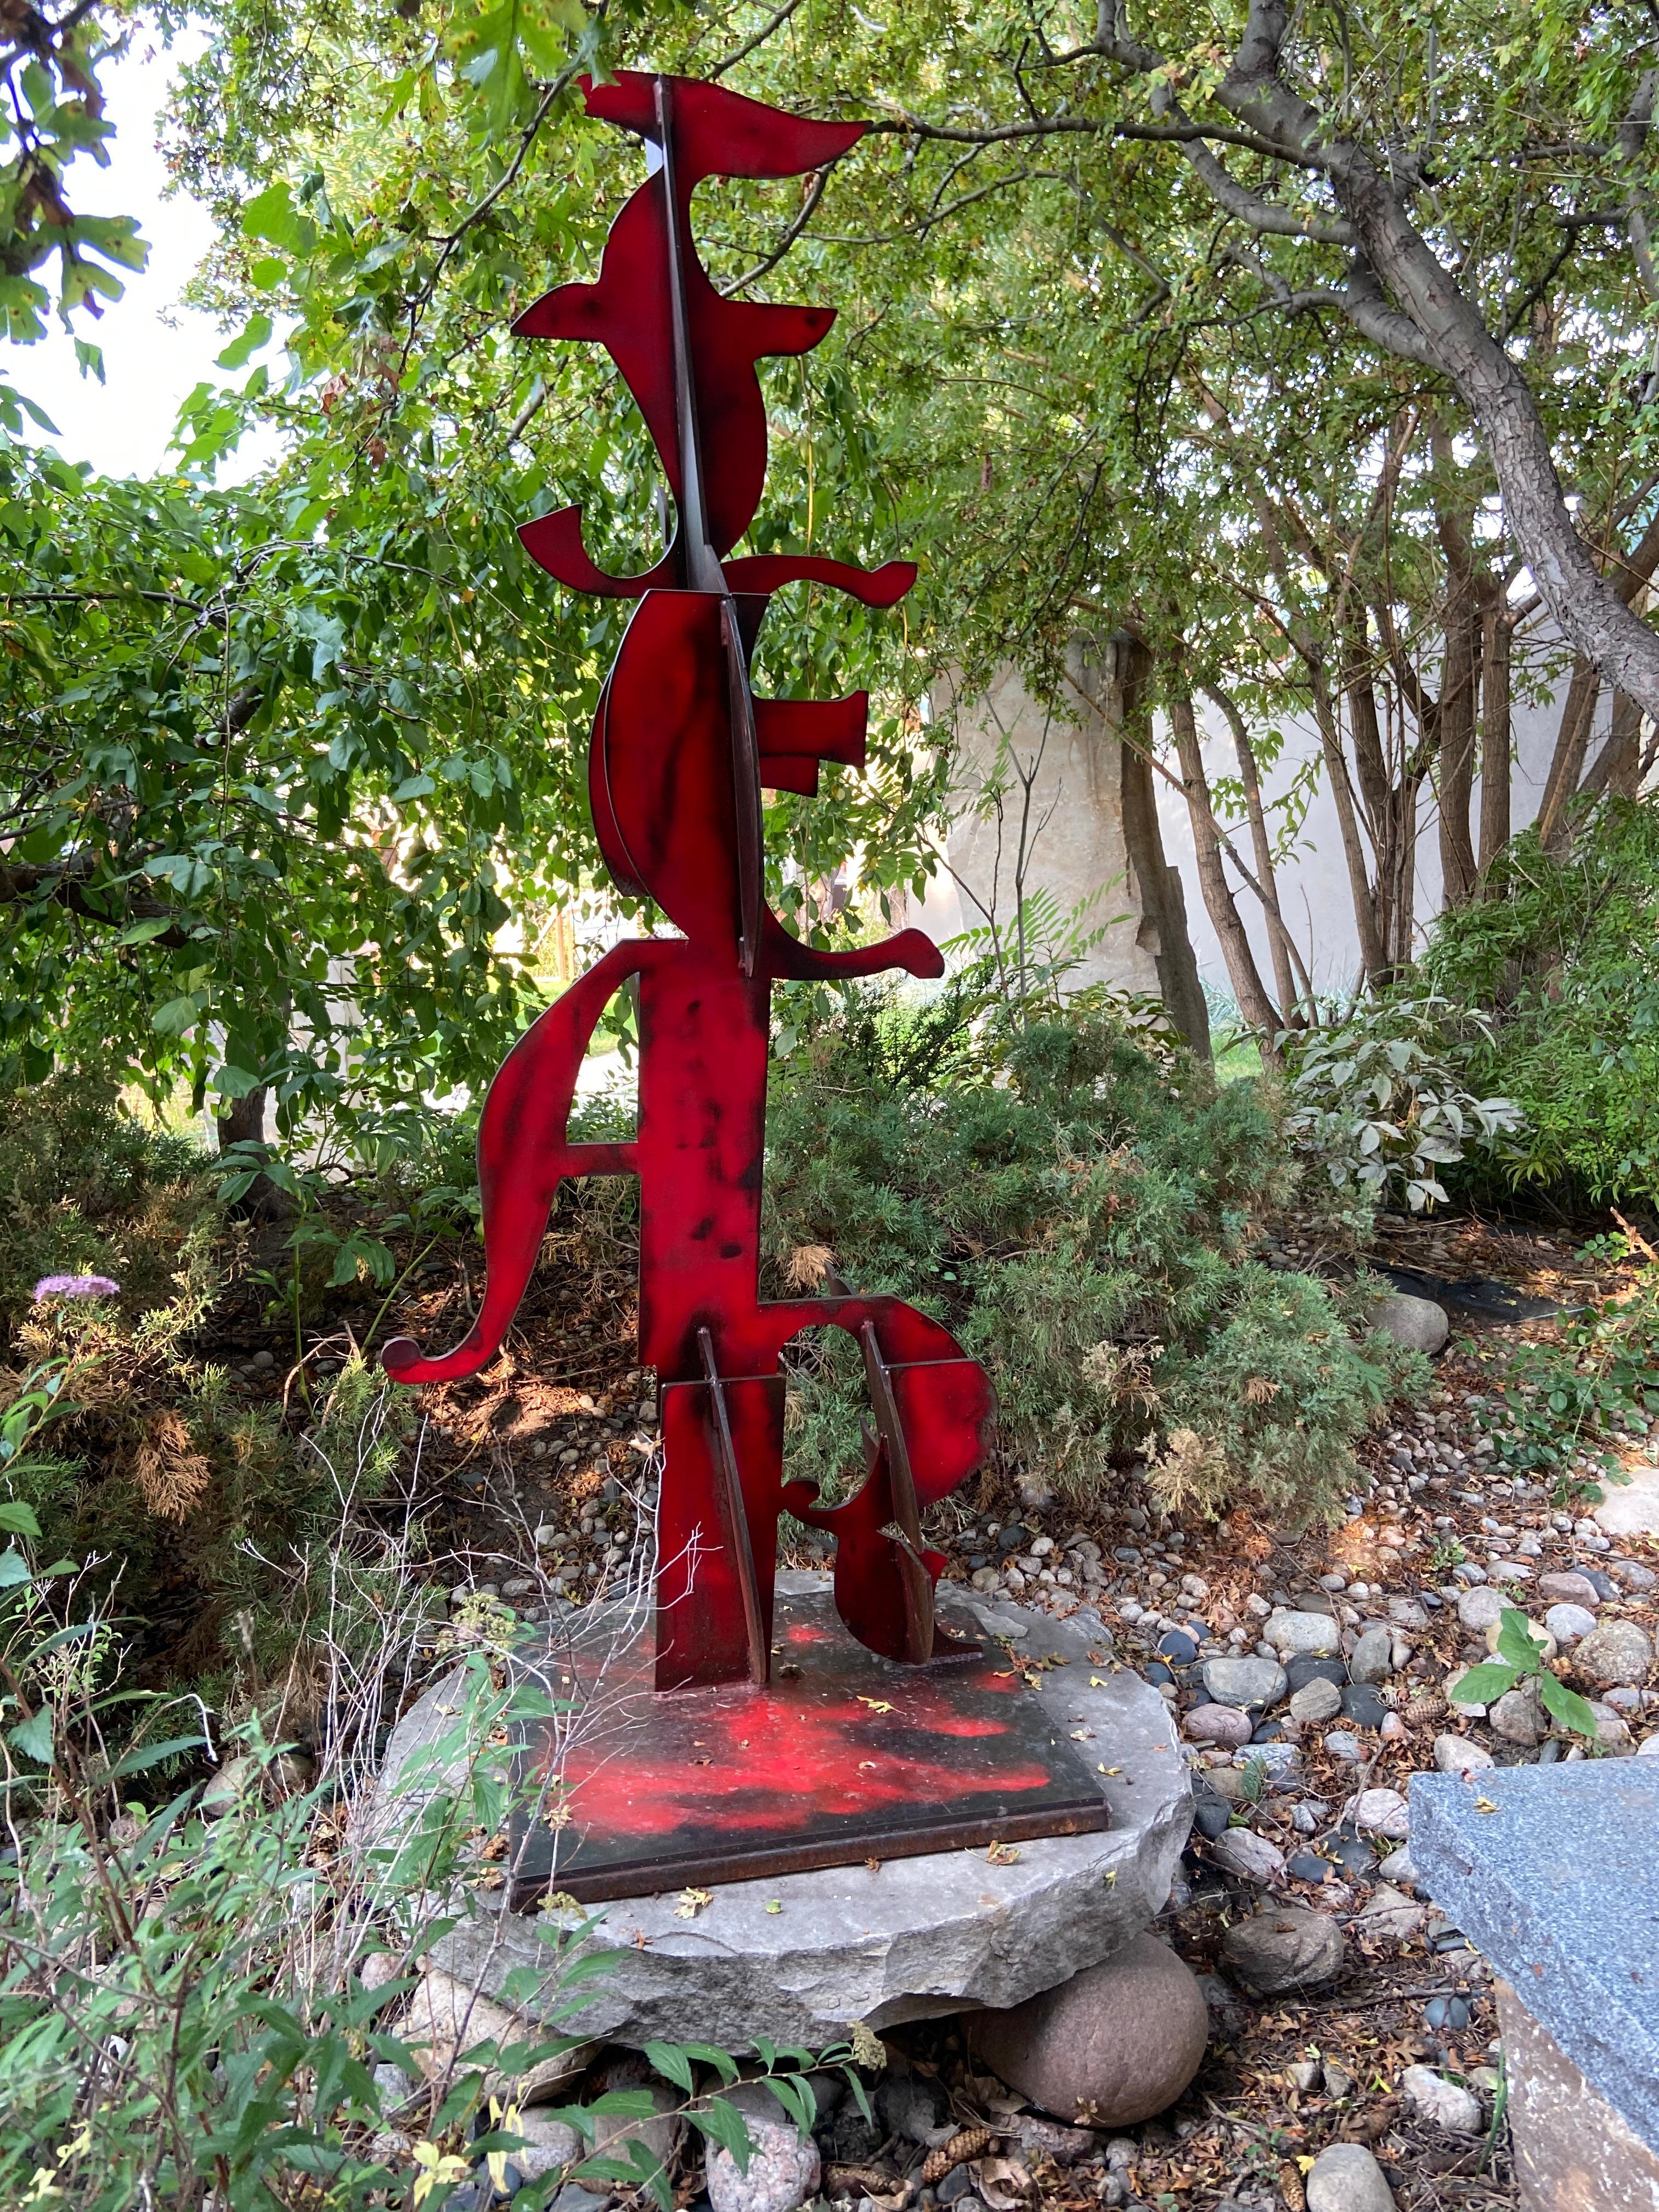 Fear / Love by Joe Norman
Word Play Garden Size Sculpture
Painted Steel finished with Clear Coat. 72x28x28